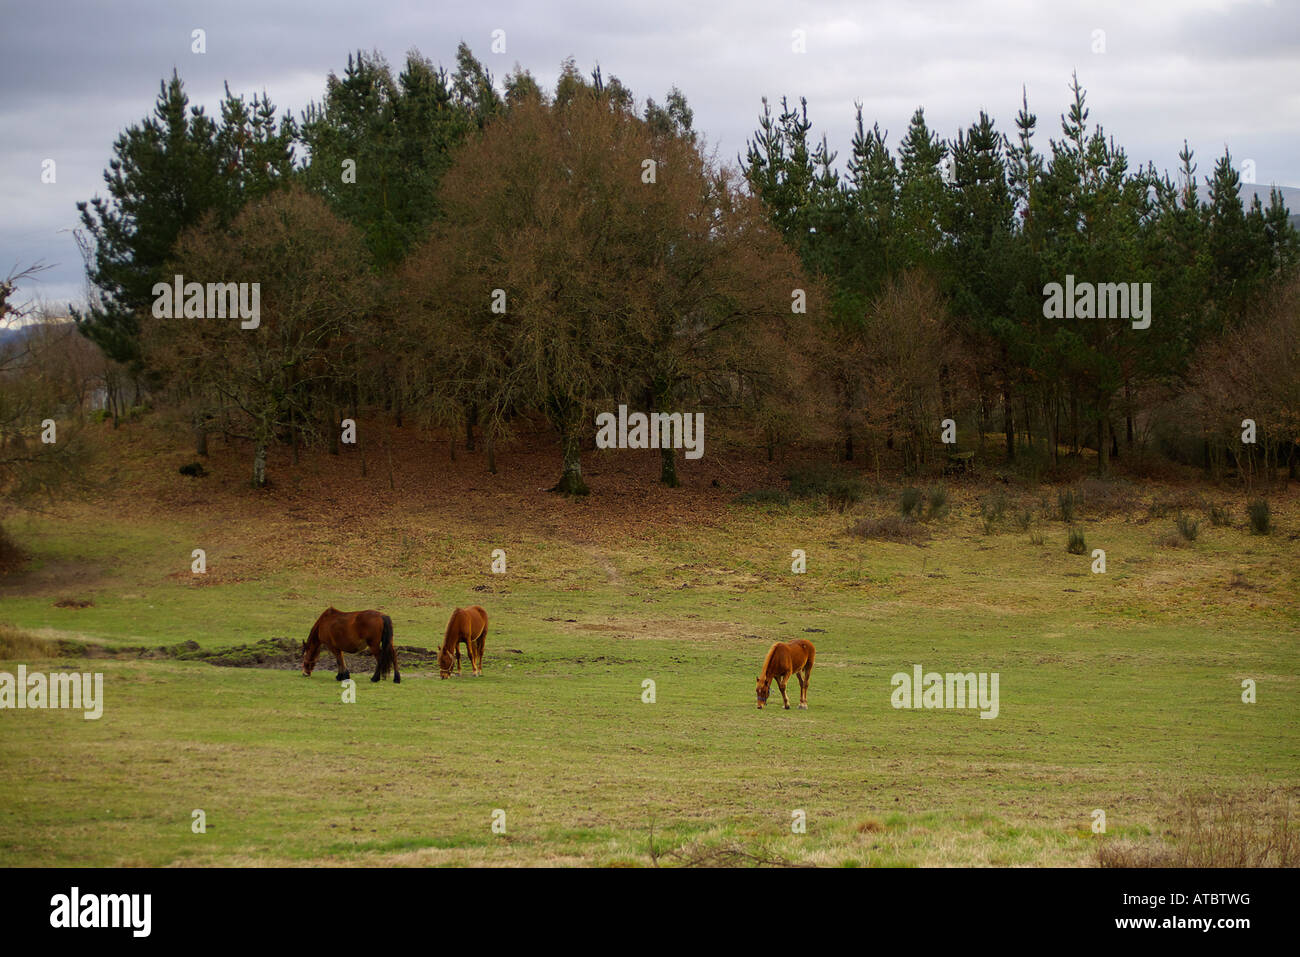 Horses grazing calmly in an autumnal landscape during a walk along the field Stock Photo